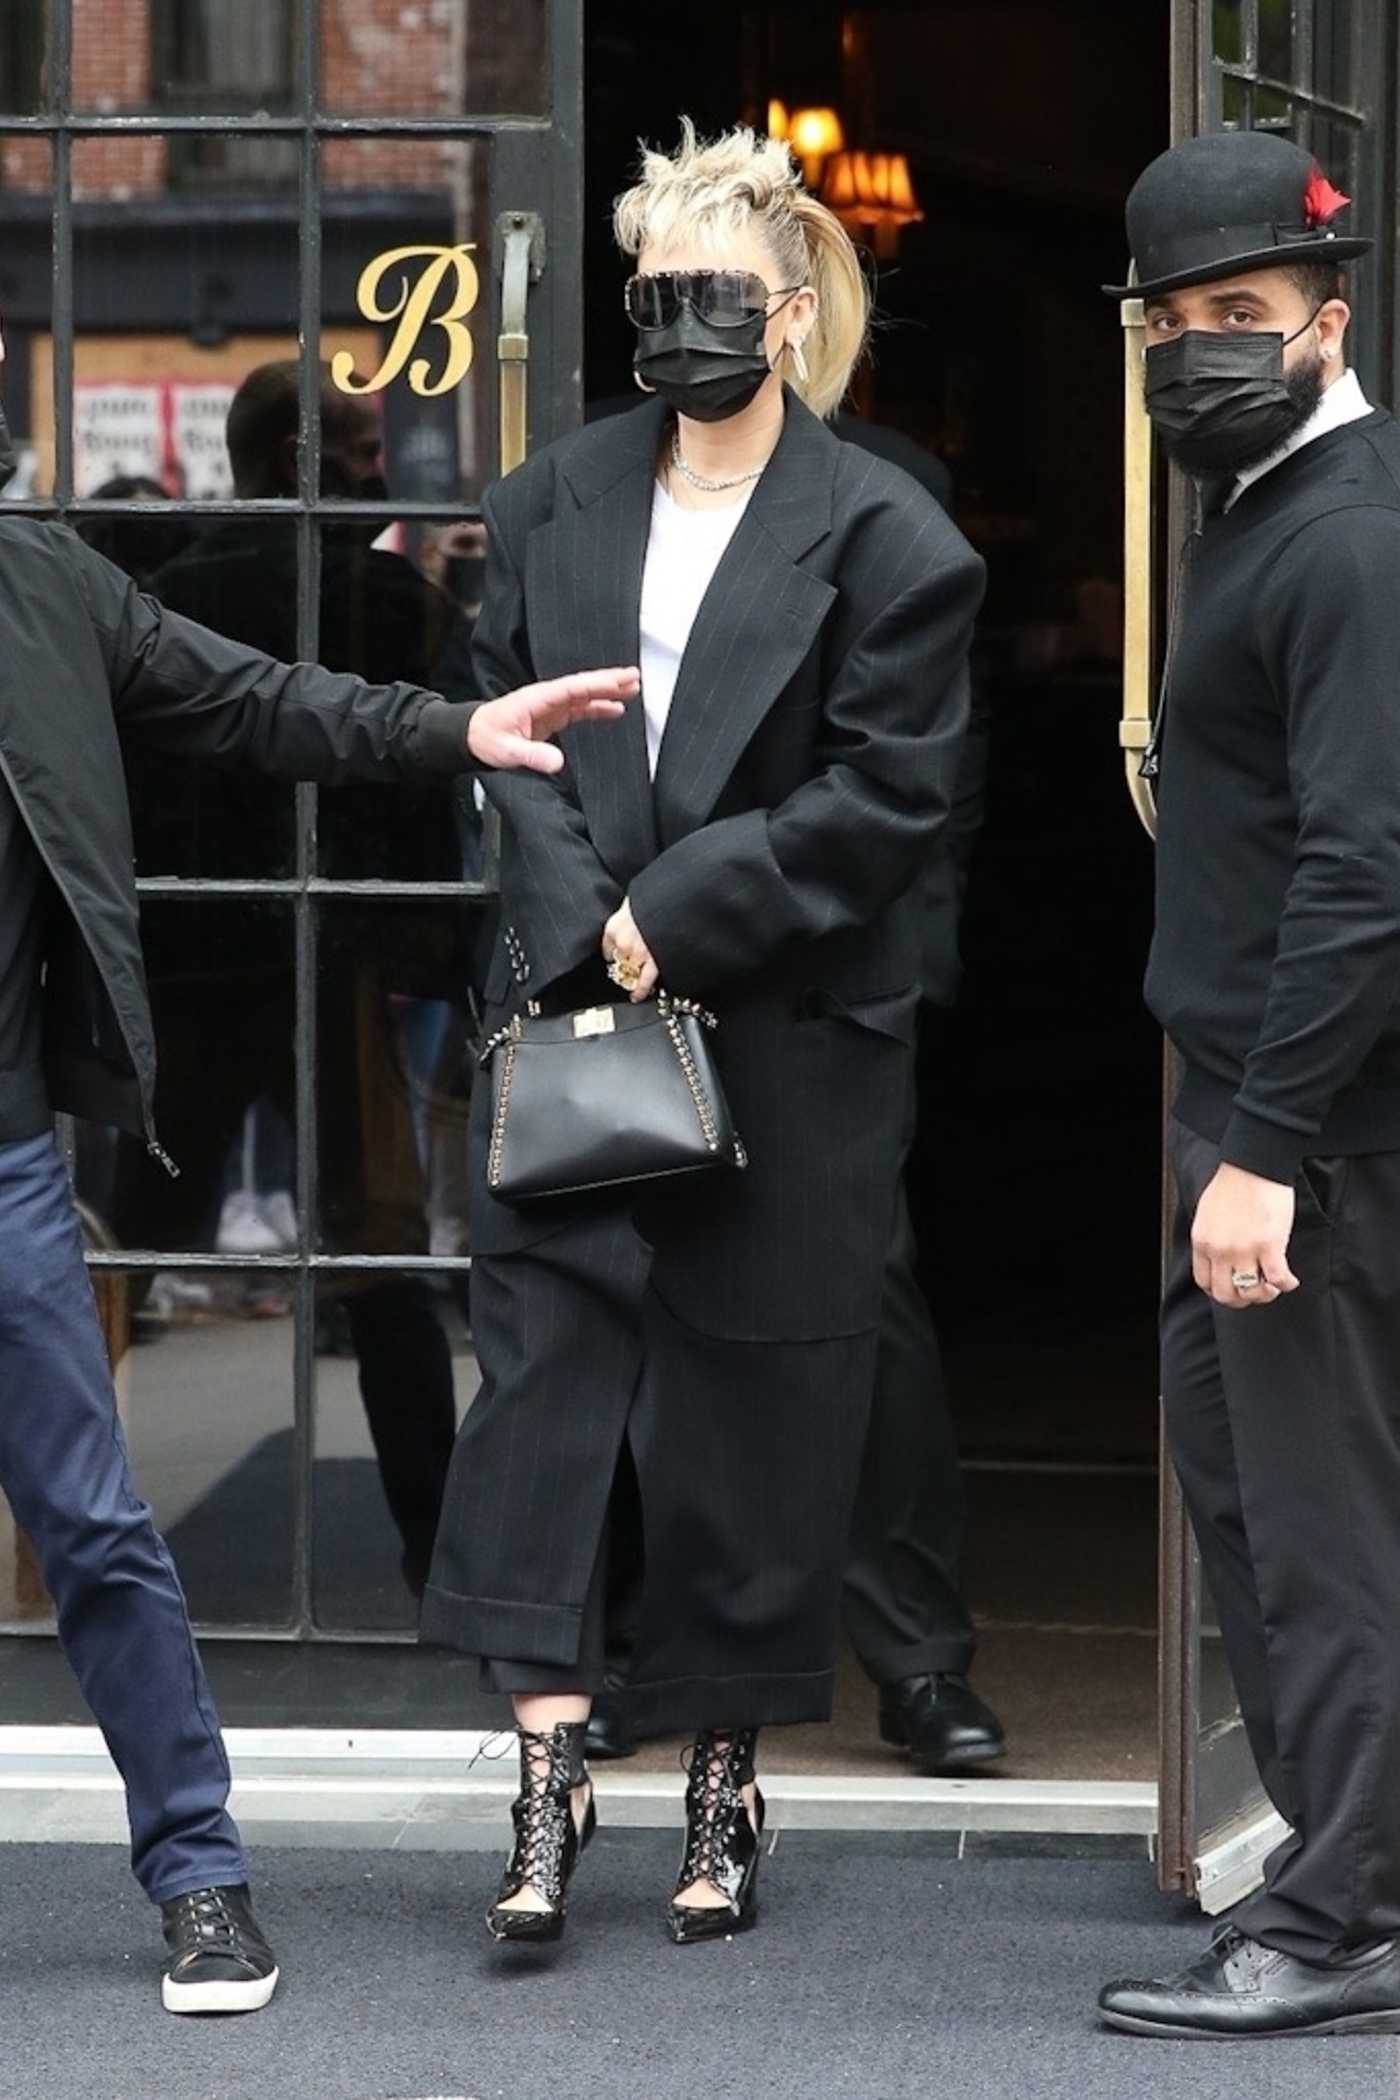 Miley Cyrus in a Black Suit Comes Out from the Bowery Hotel in New York 05/08/2021